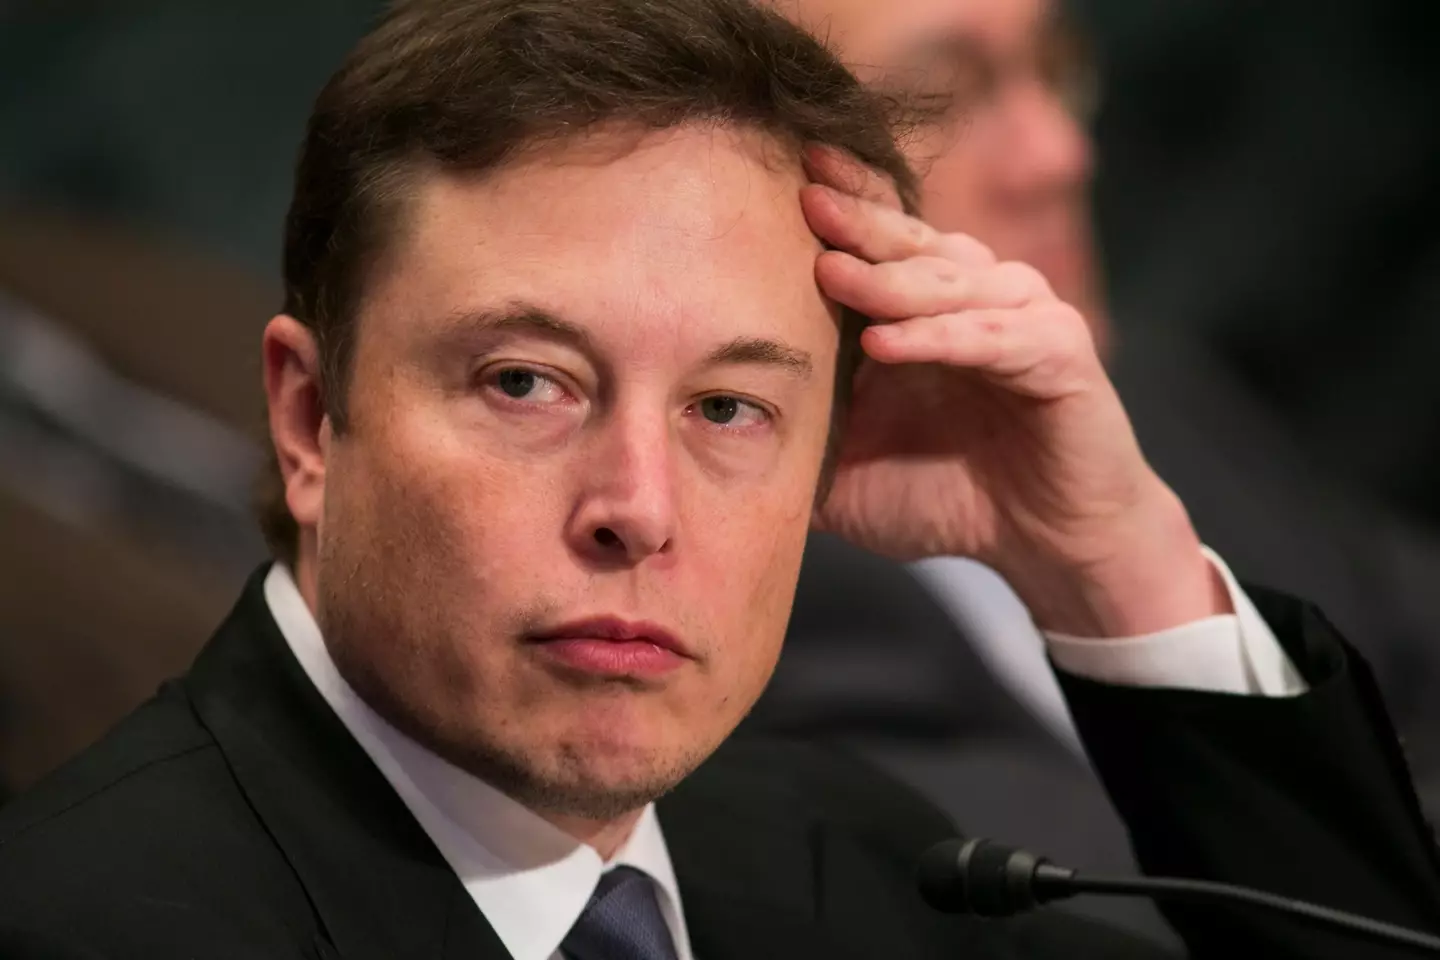 Musk's company Neuralink is behind the grim experiments.